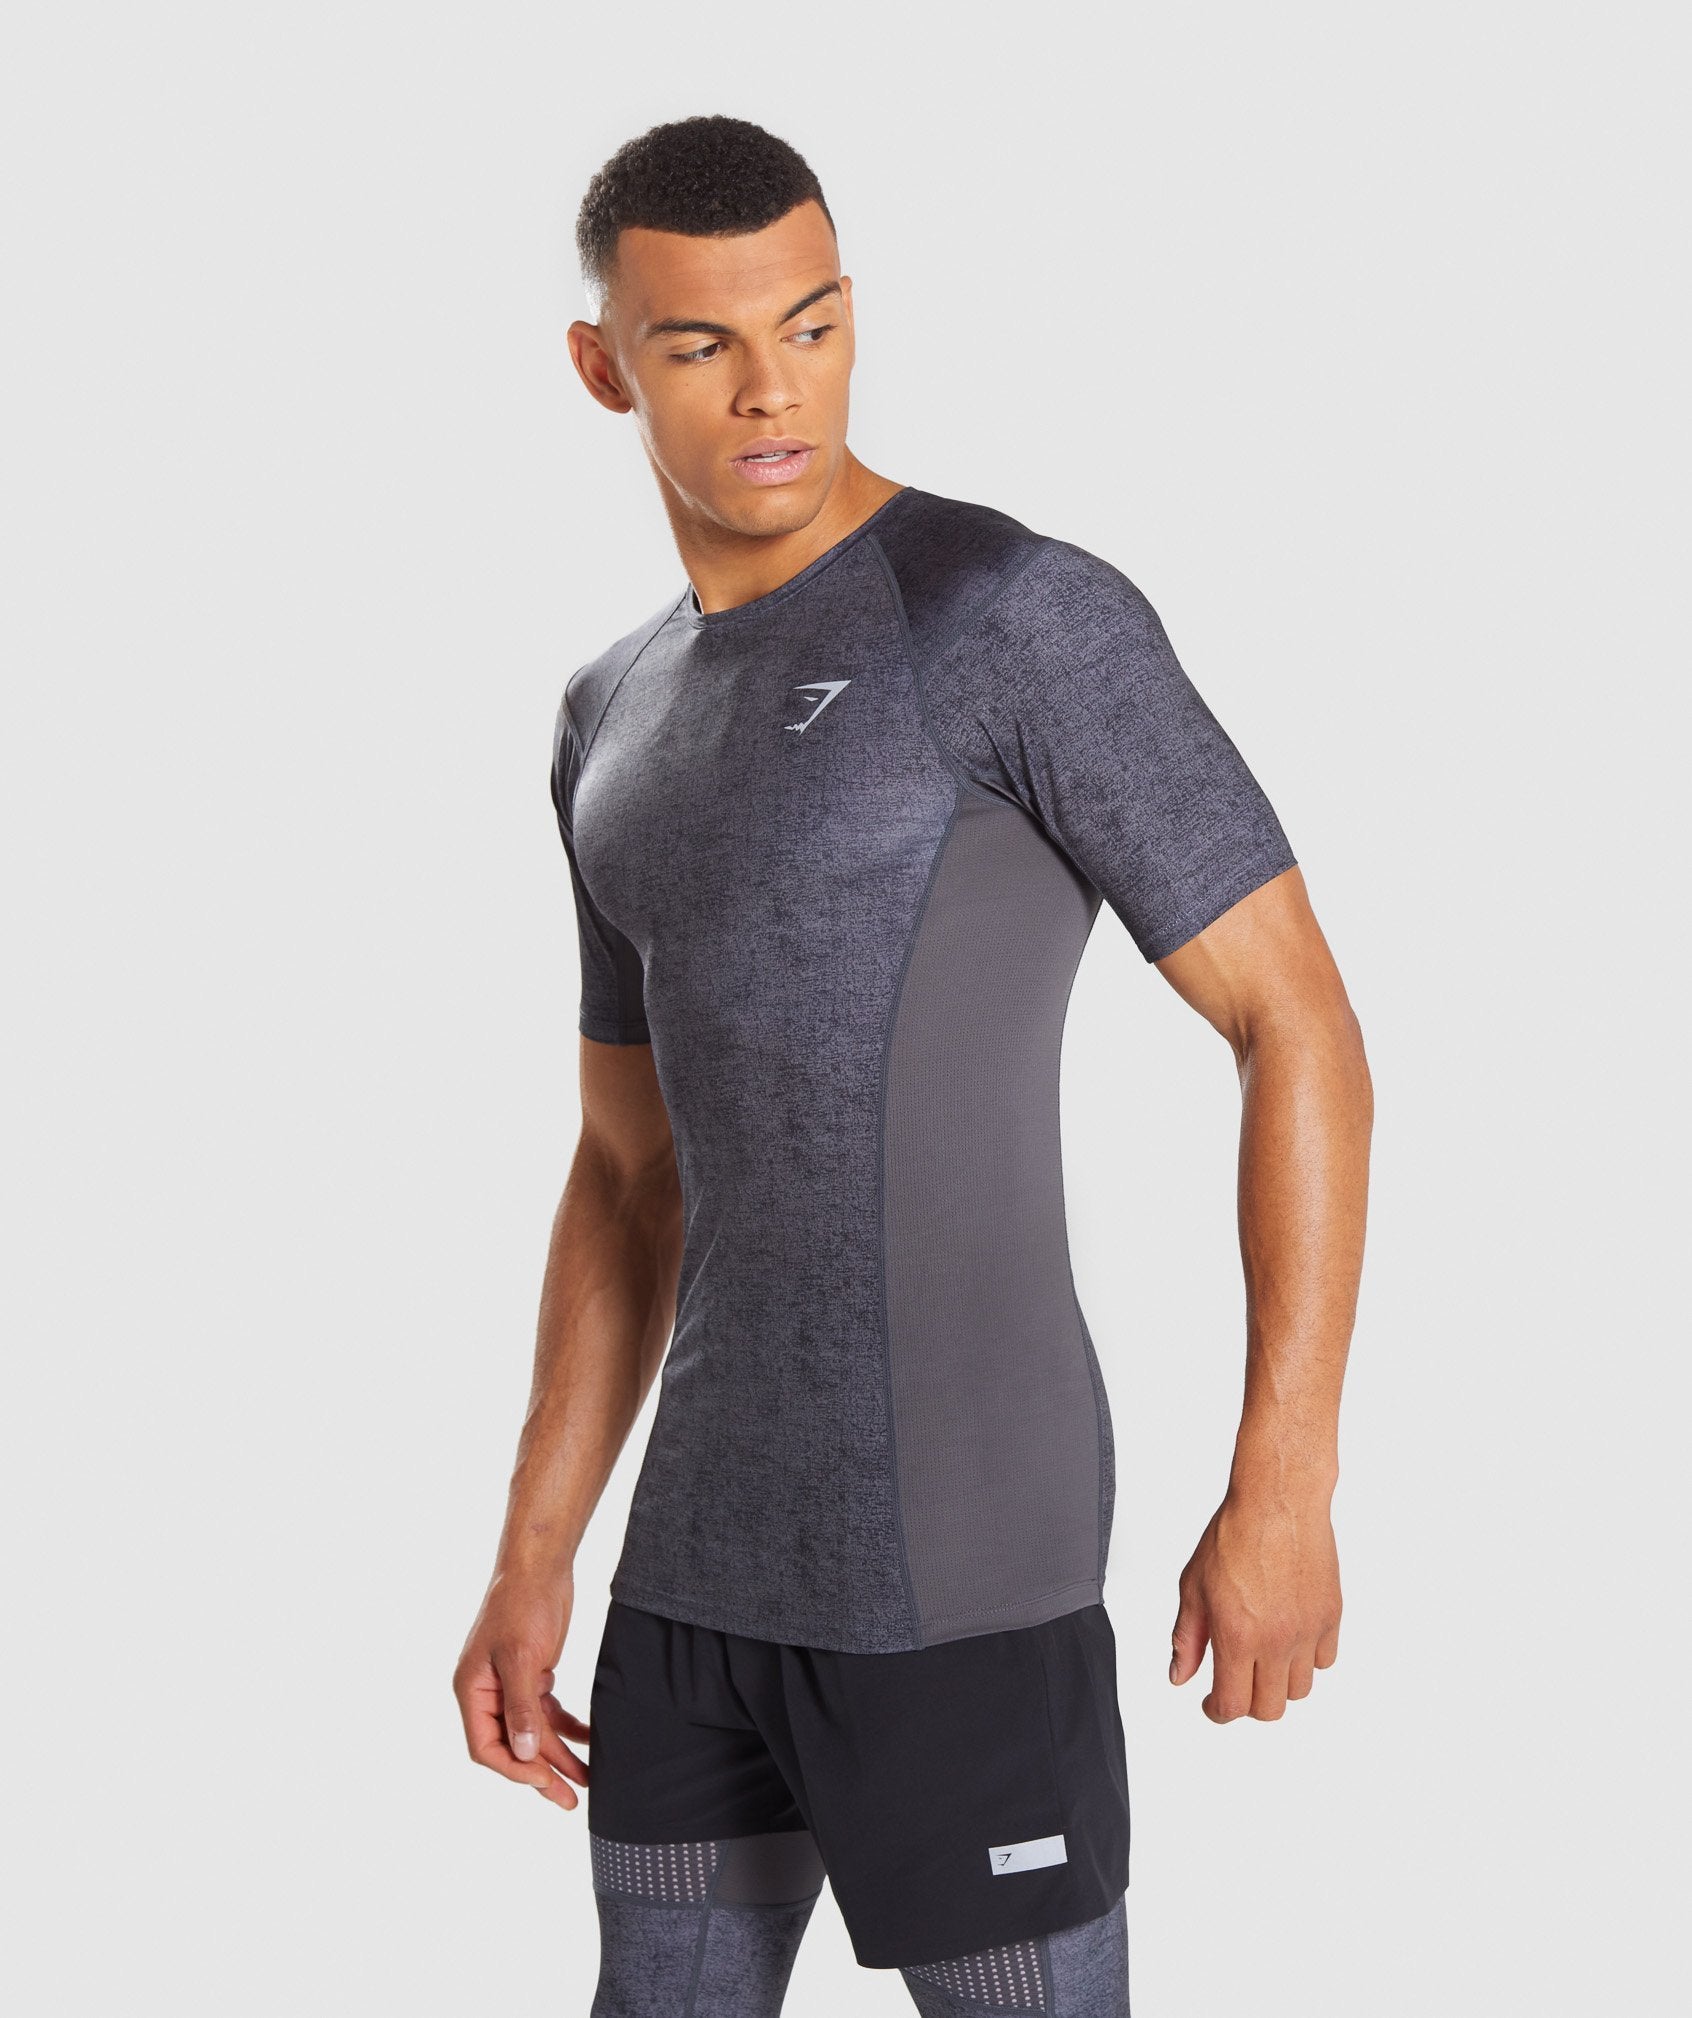 Hybrid Baselayer Top in Charcoal Marl - view 3